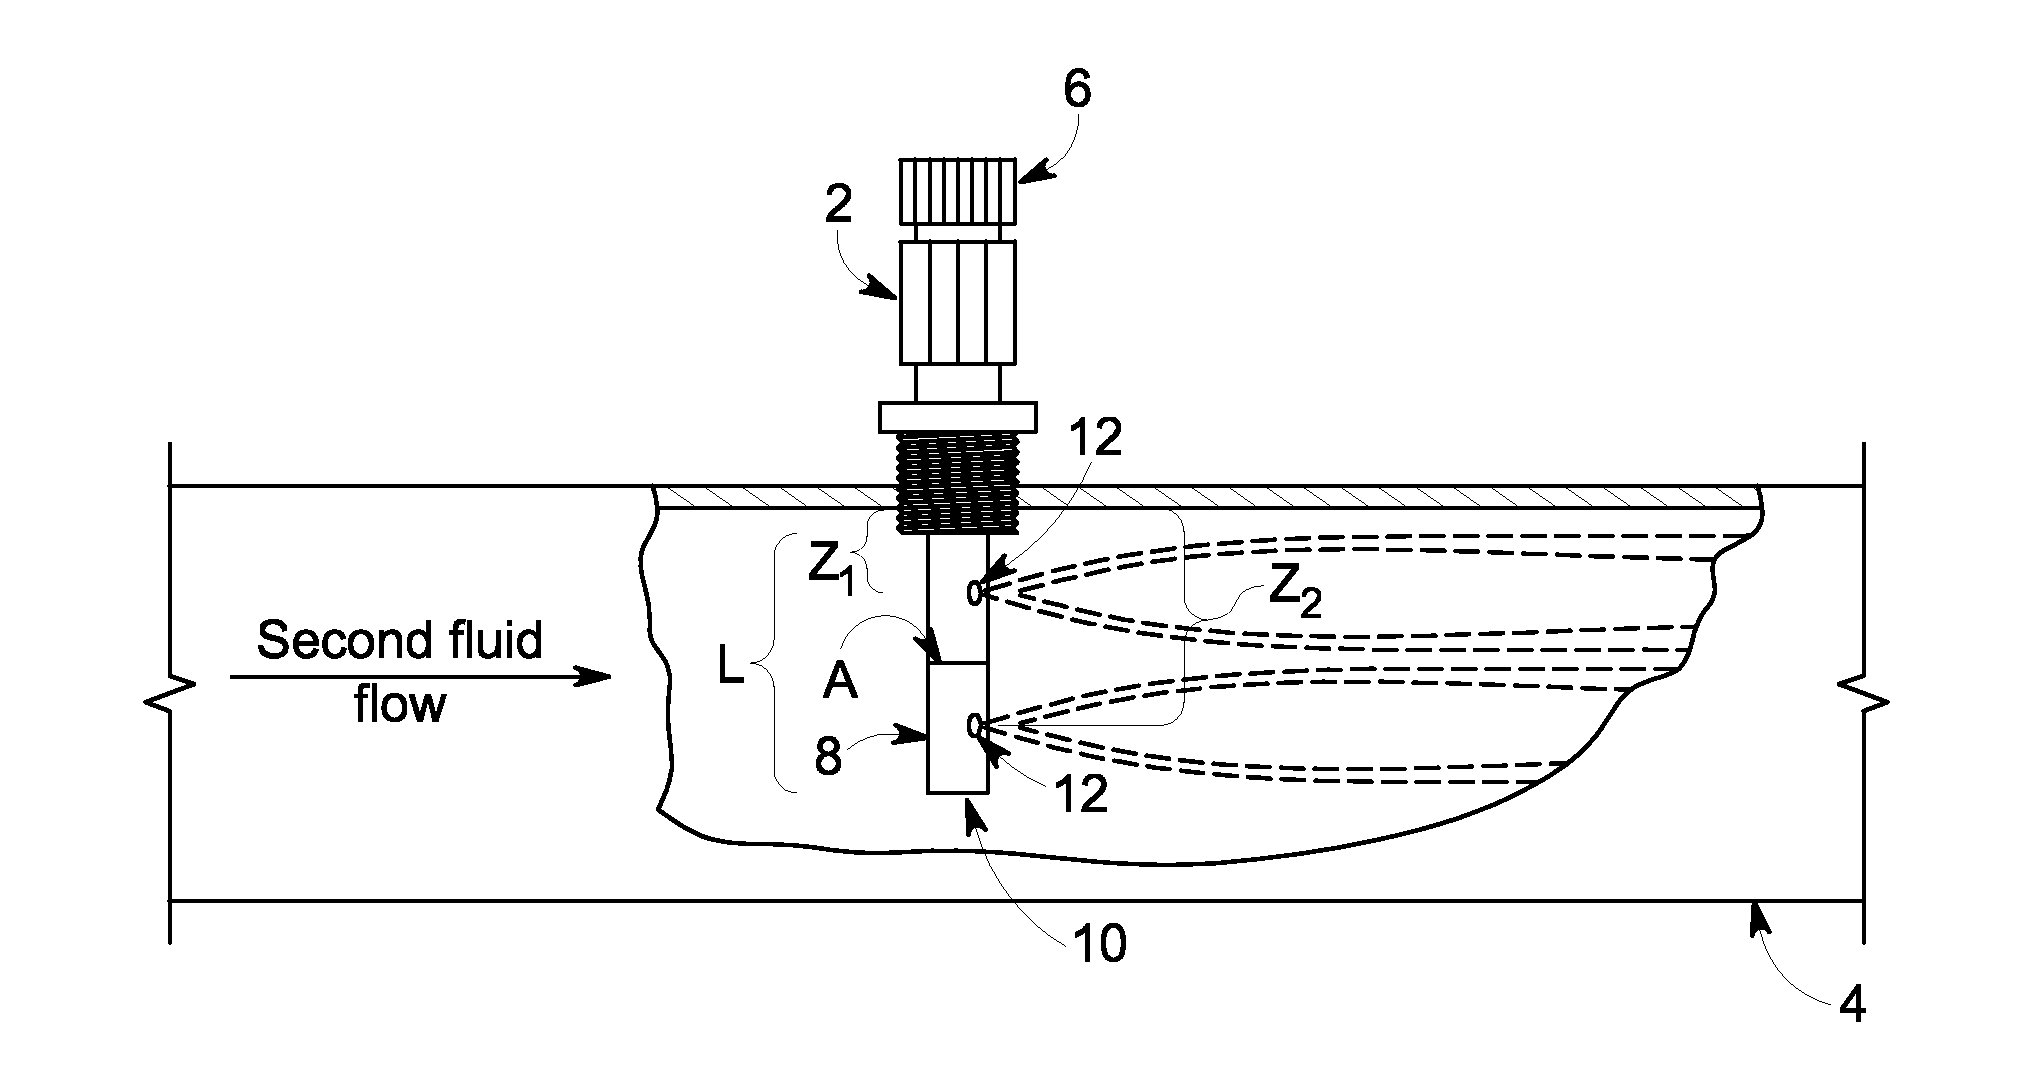 Injection quill designs and methods of use